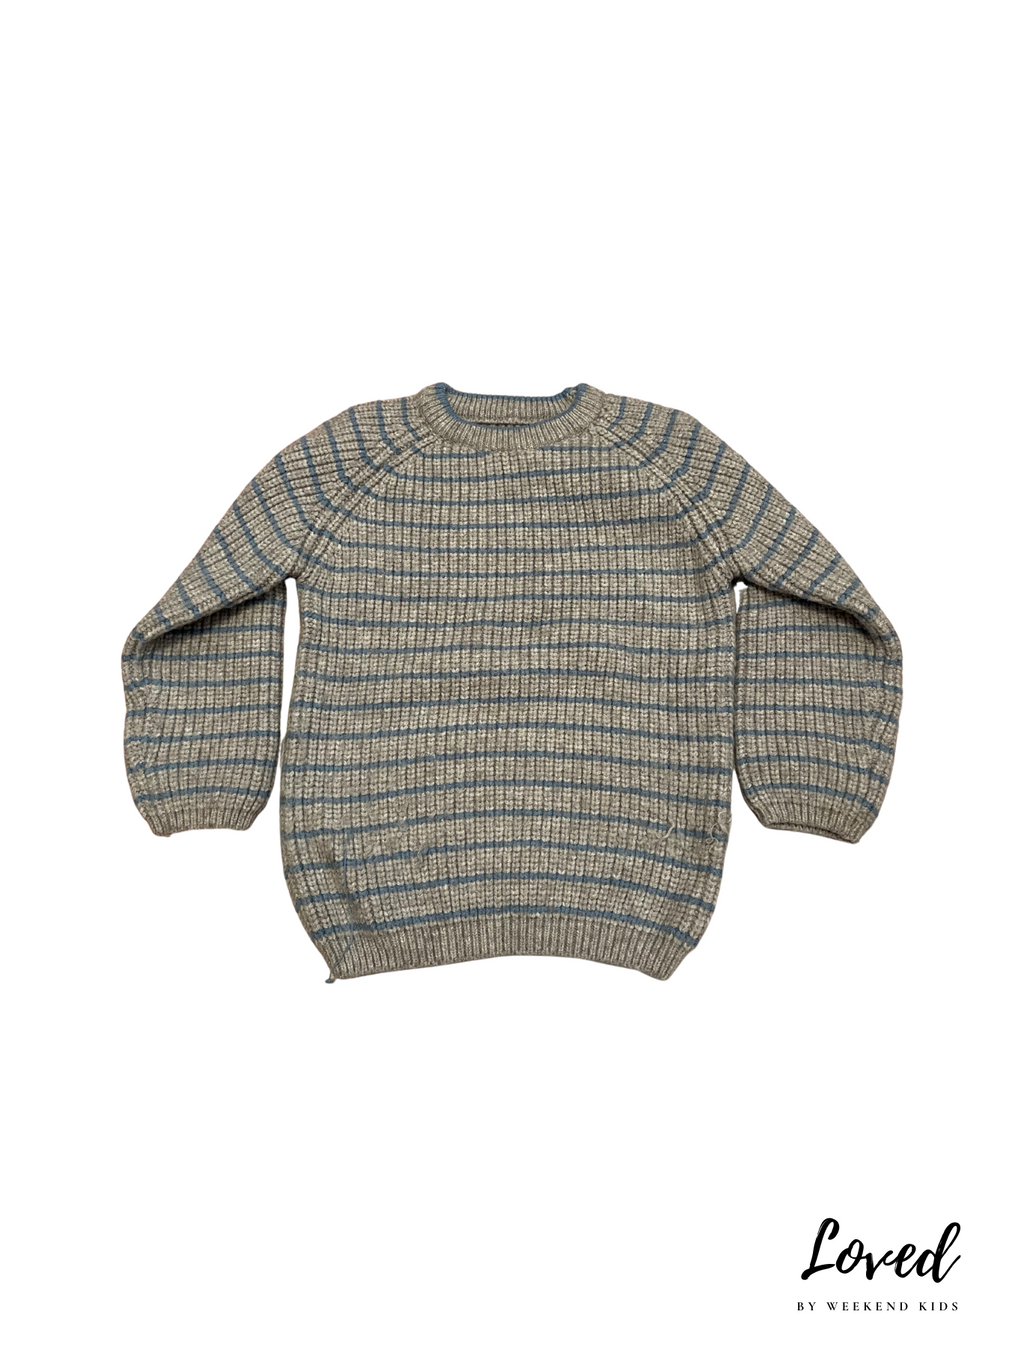 Joaquin Sweater (Loved)